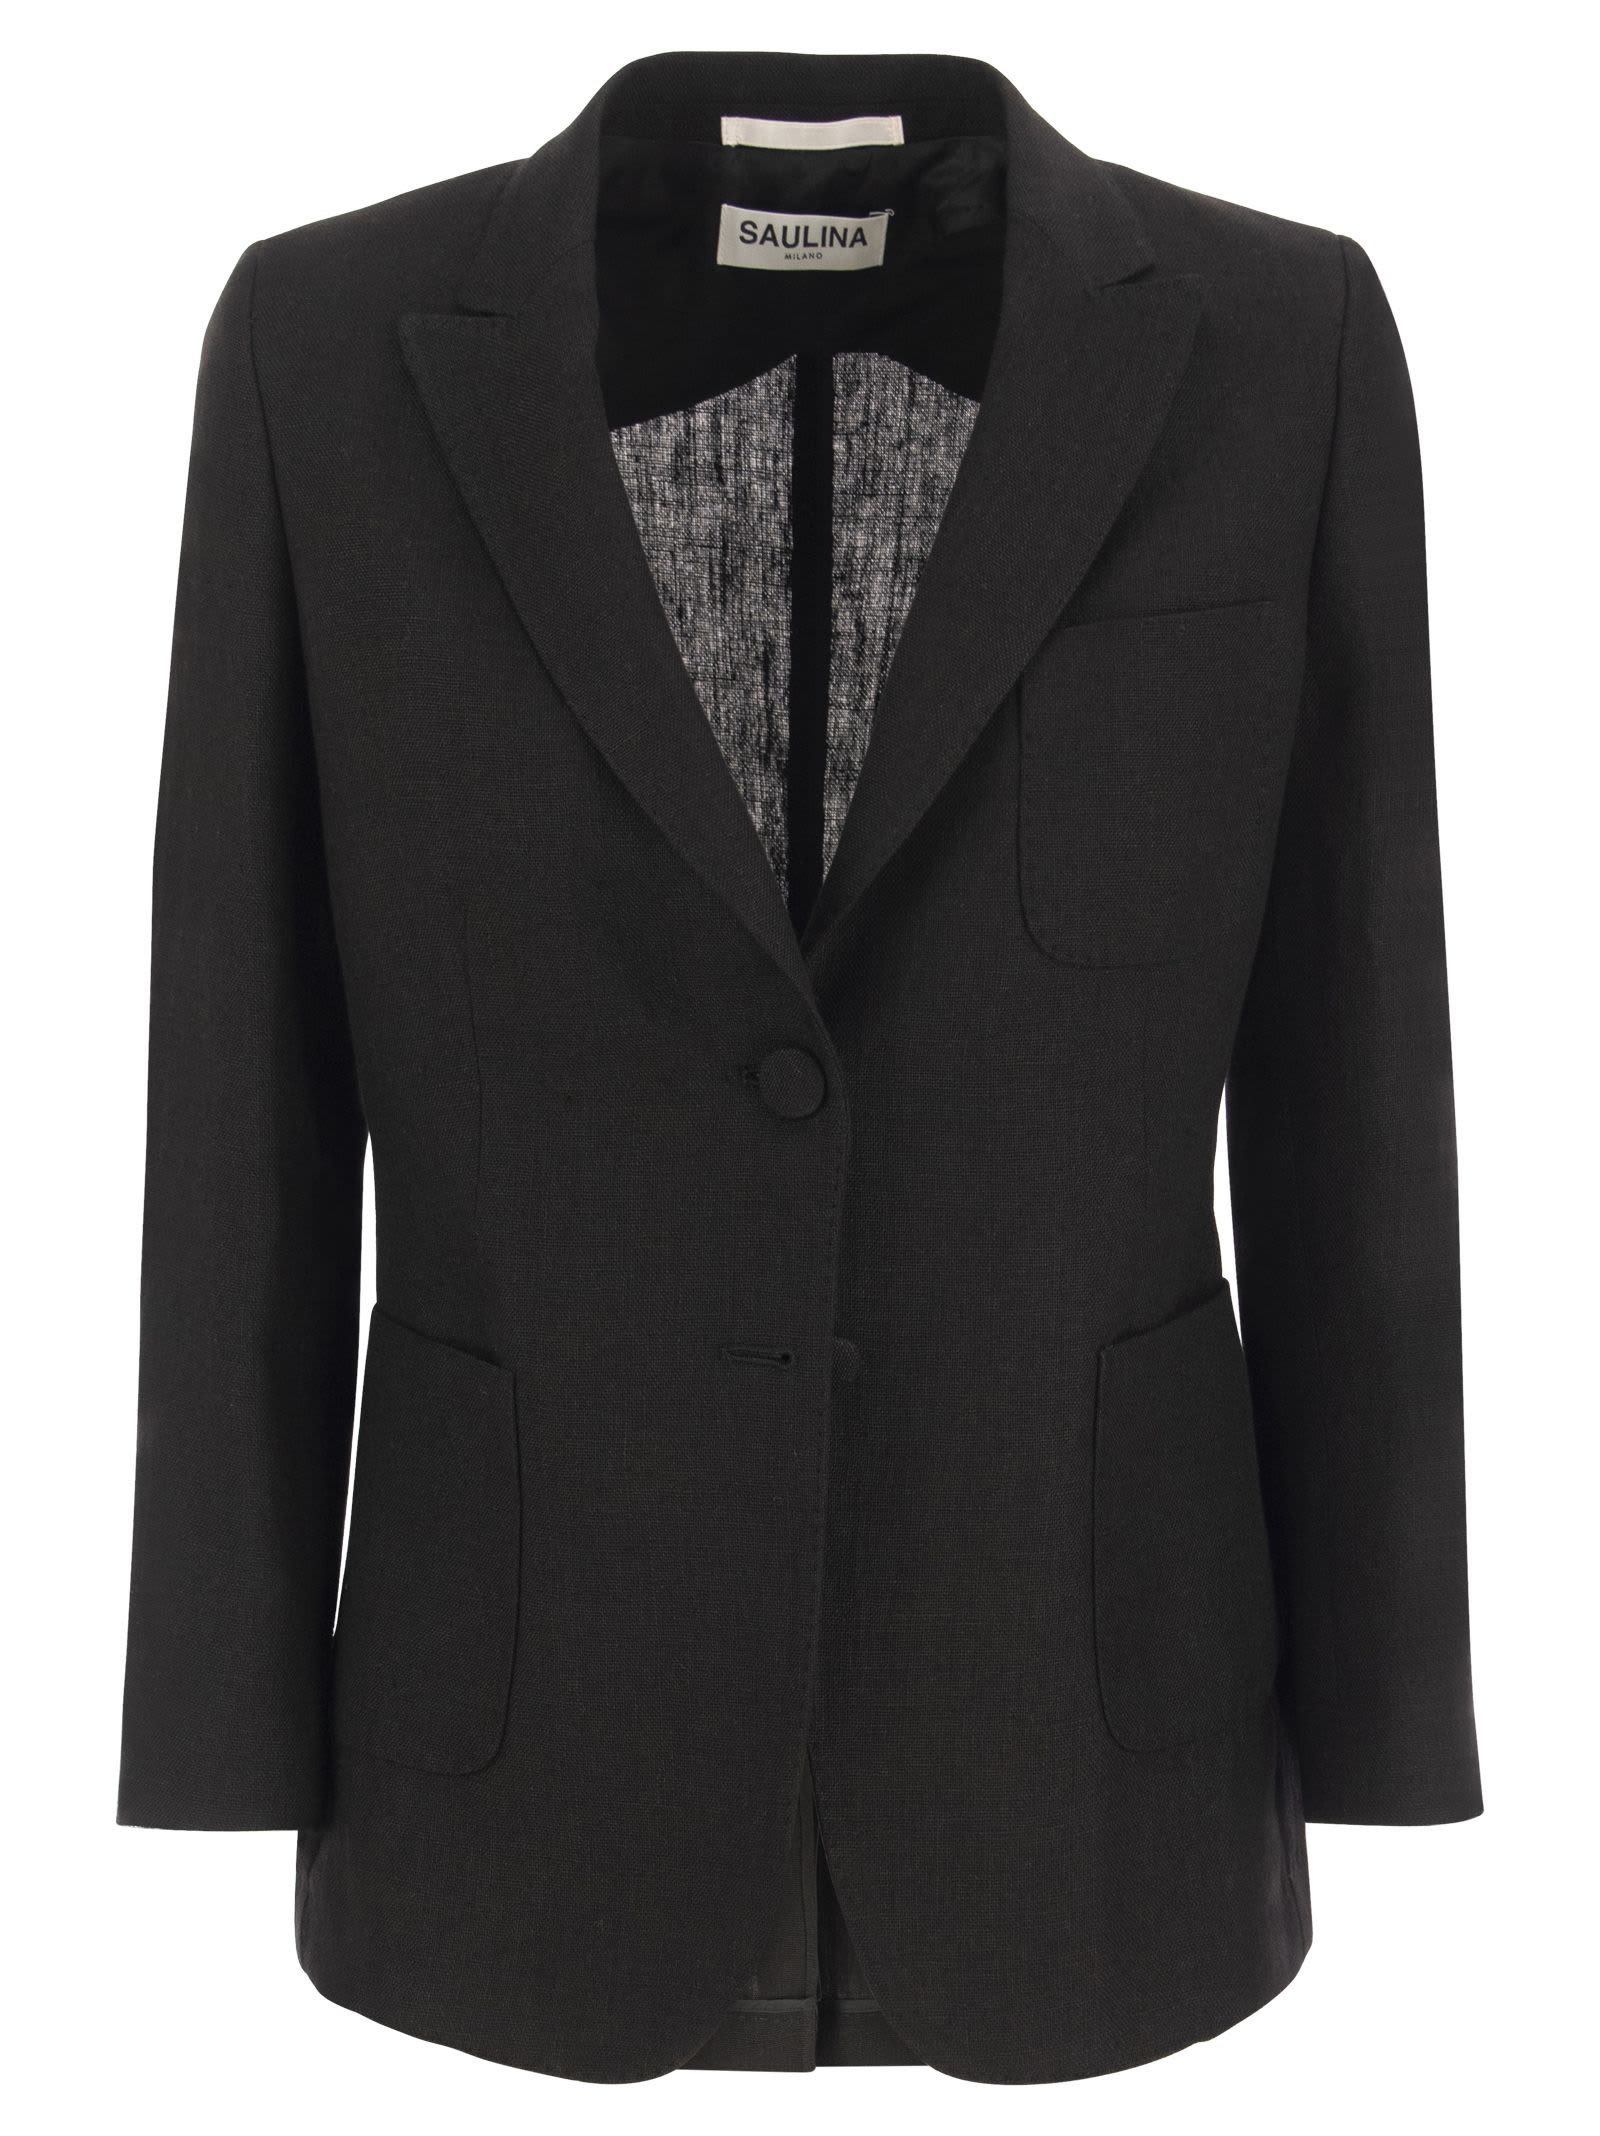 Adelaide - Linen Two-button Jacket